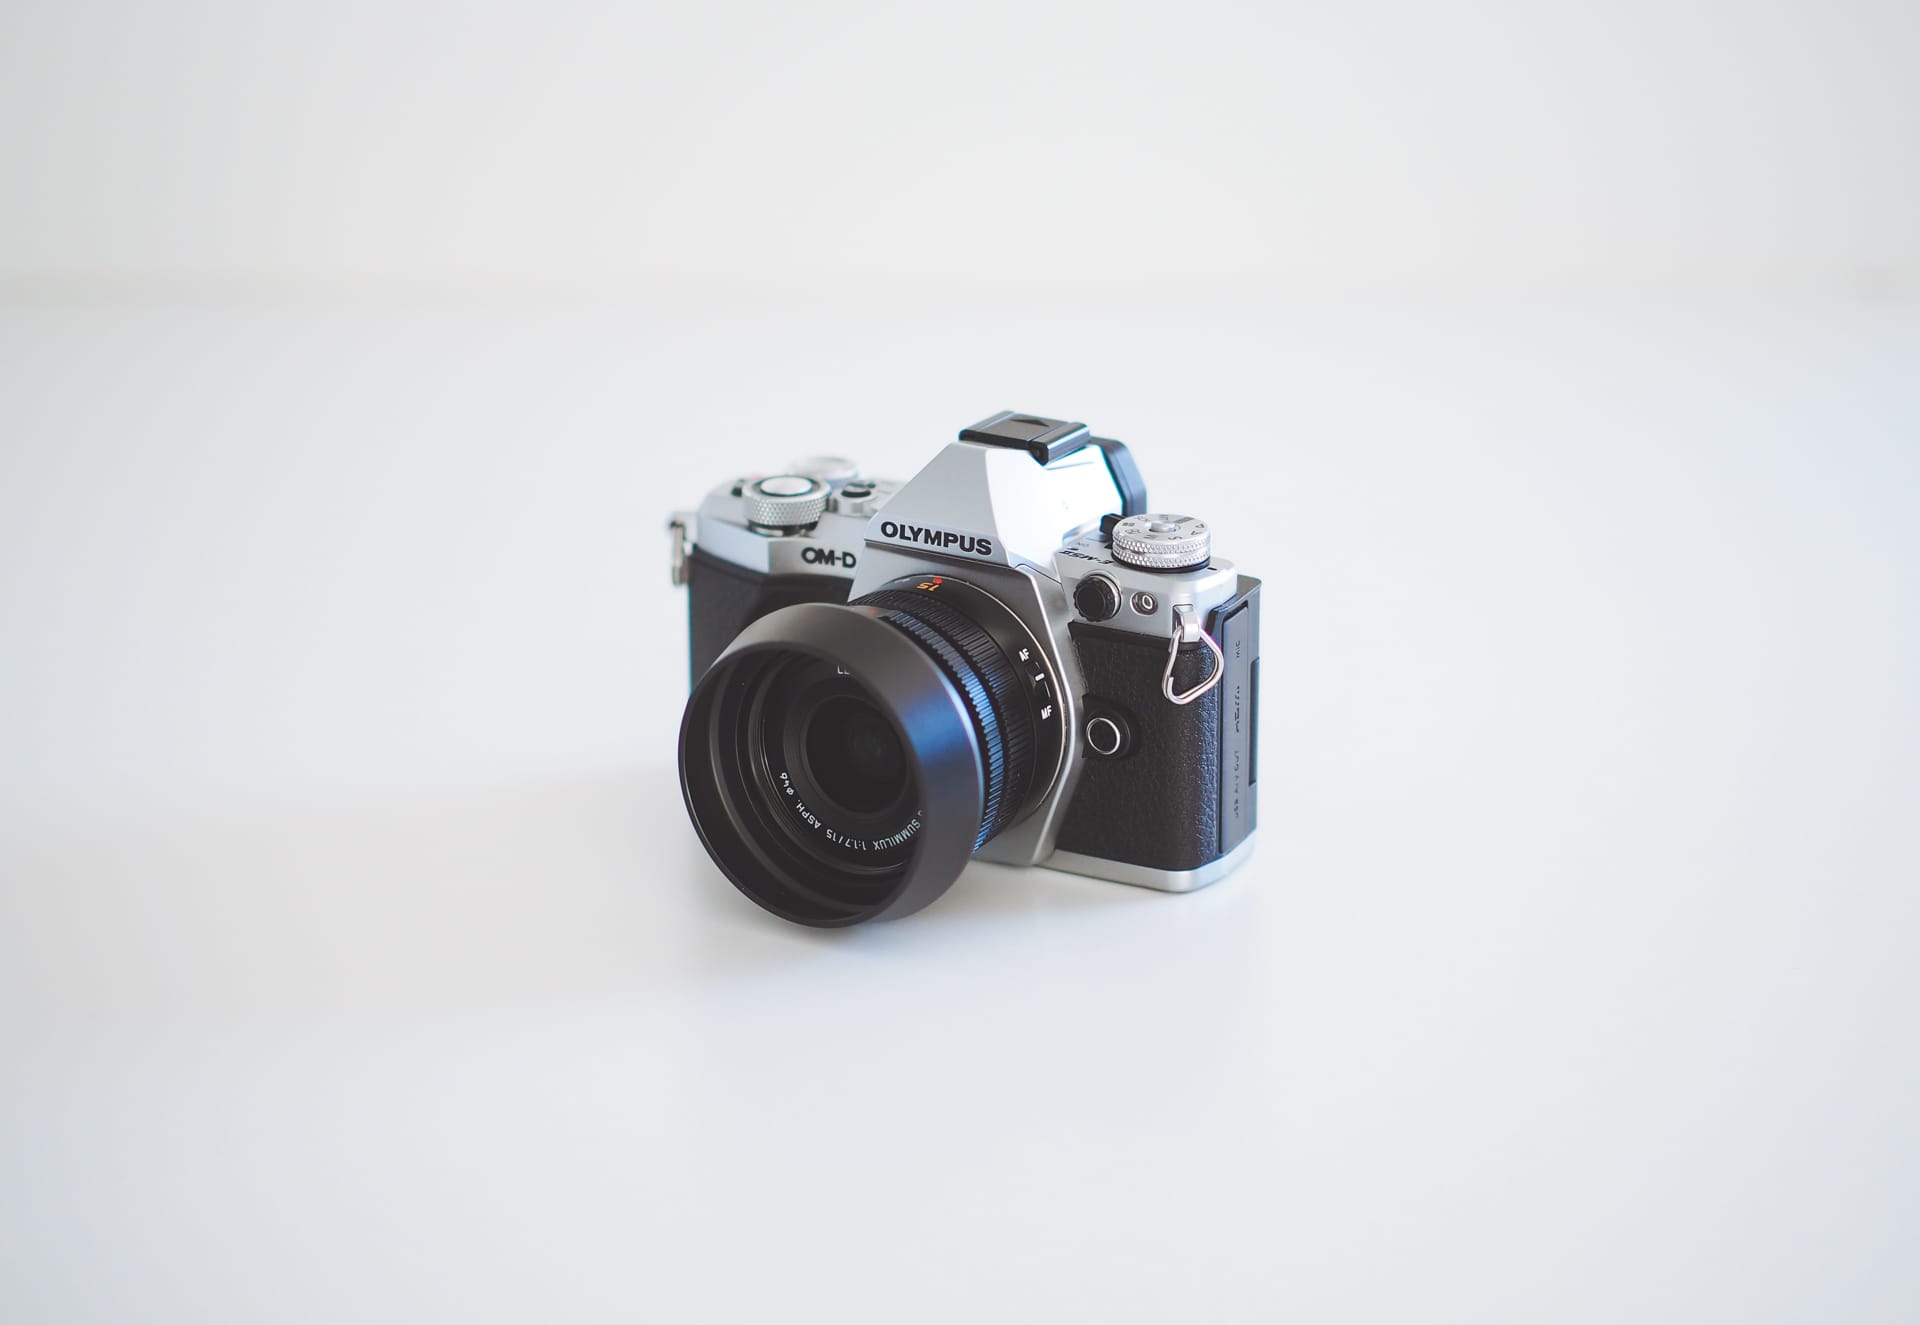 MENGS E-M5 II L-Shaped Quick Release Plate With Hand Grip And Aluminum Alloy Material For Olympus OM-D E-M5 II Camera 